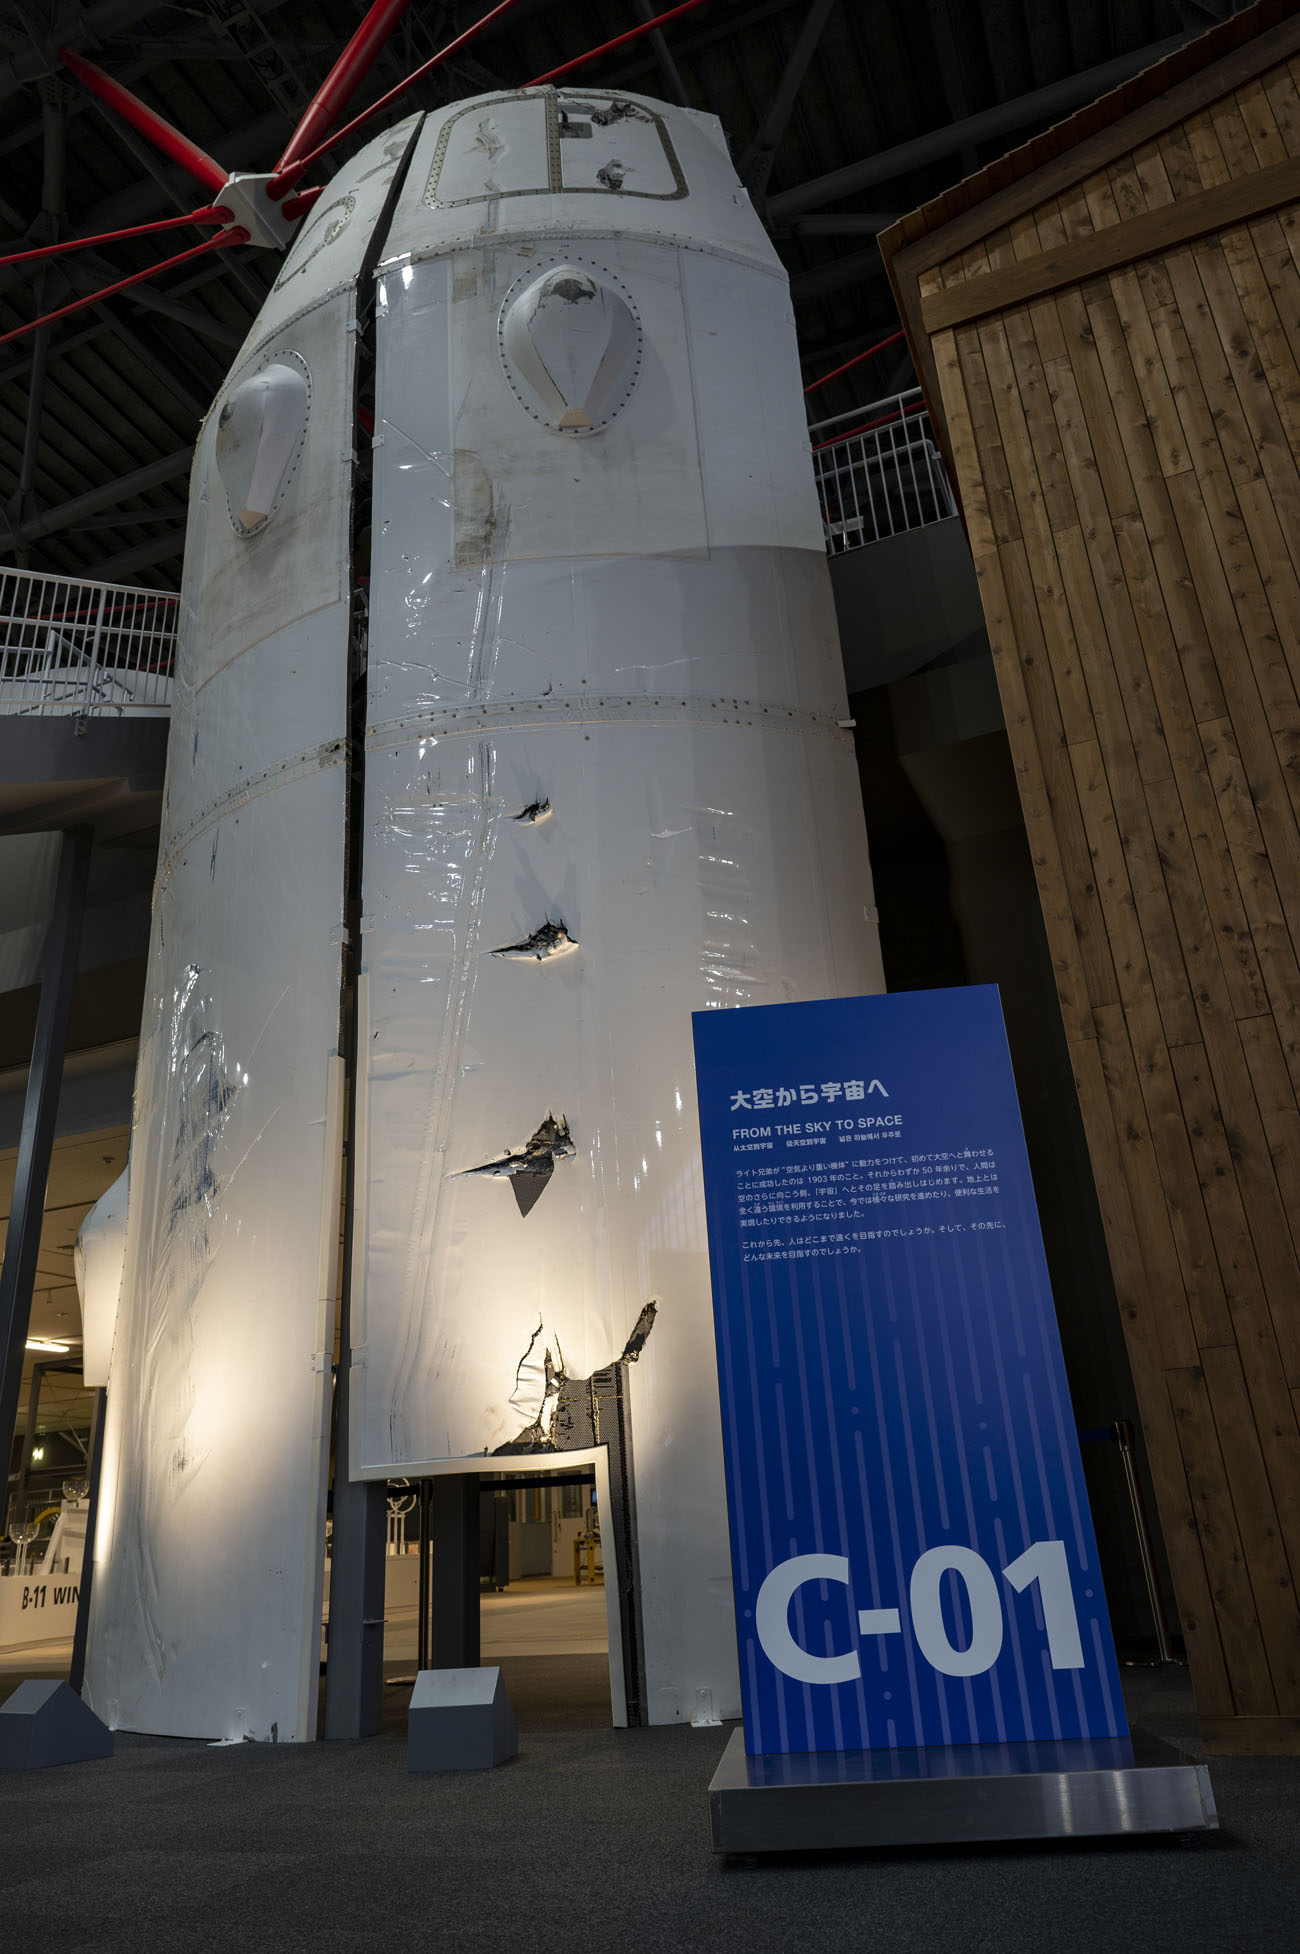 C-01 大空から宇宙へ(日本の技術が詰まった重量級ロケット)　a heavy rocket packed with Japanese technology